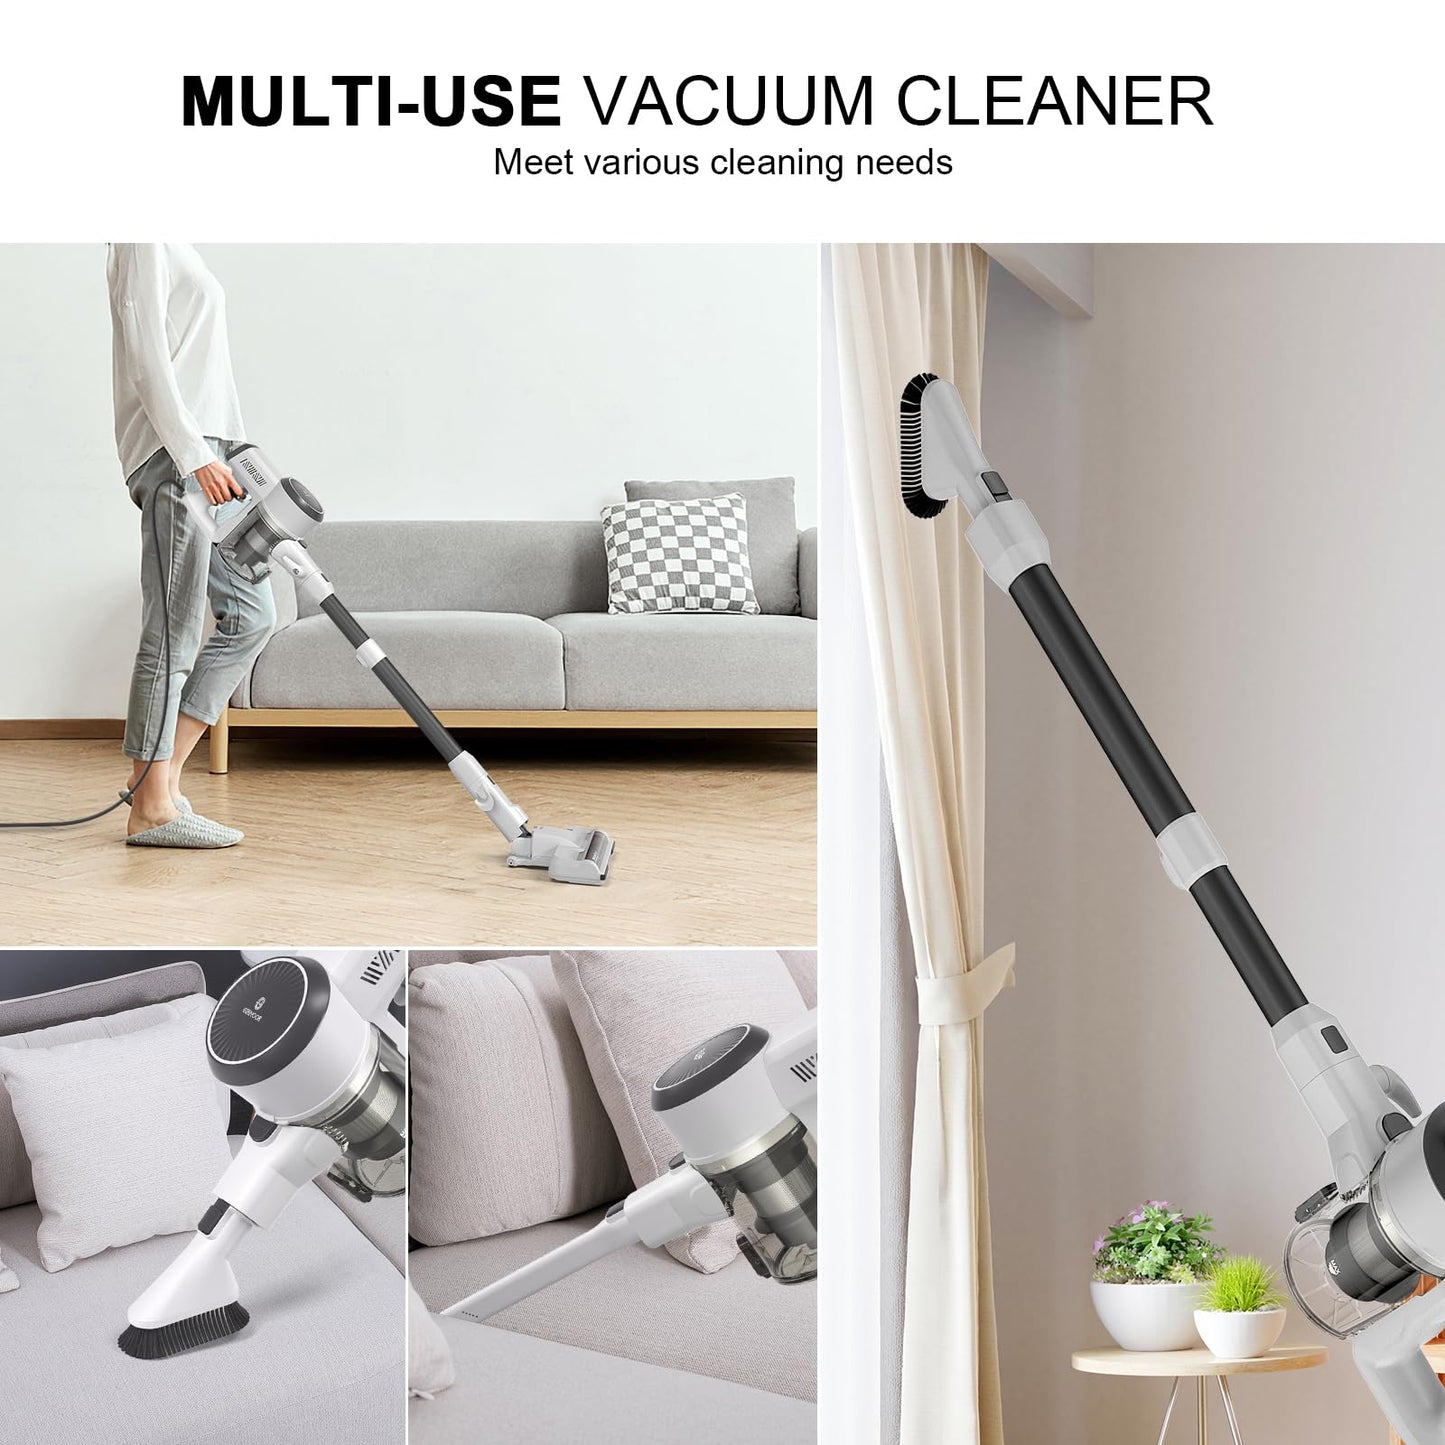 TMA Rocket Ultra-Light Corded Bagless Vacuum for Carpet and Hard Floor Cleaning with Swivel Steering, black&white